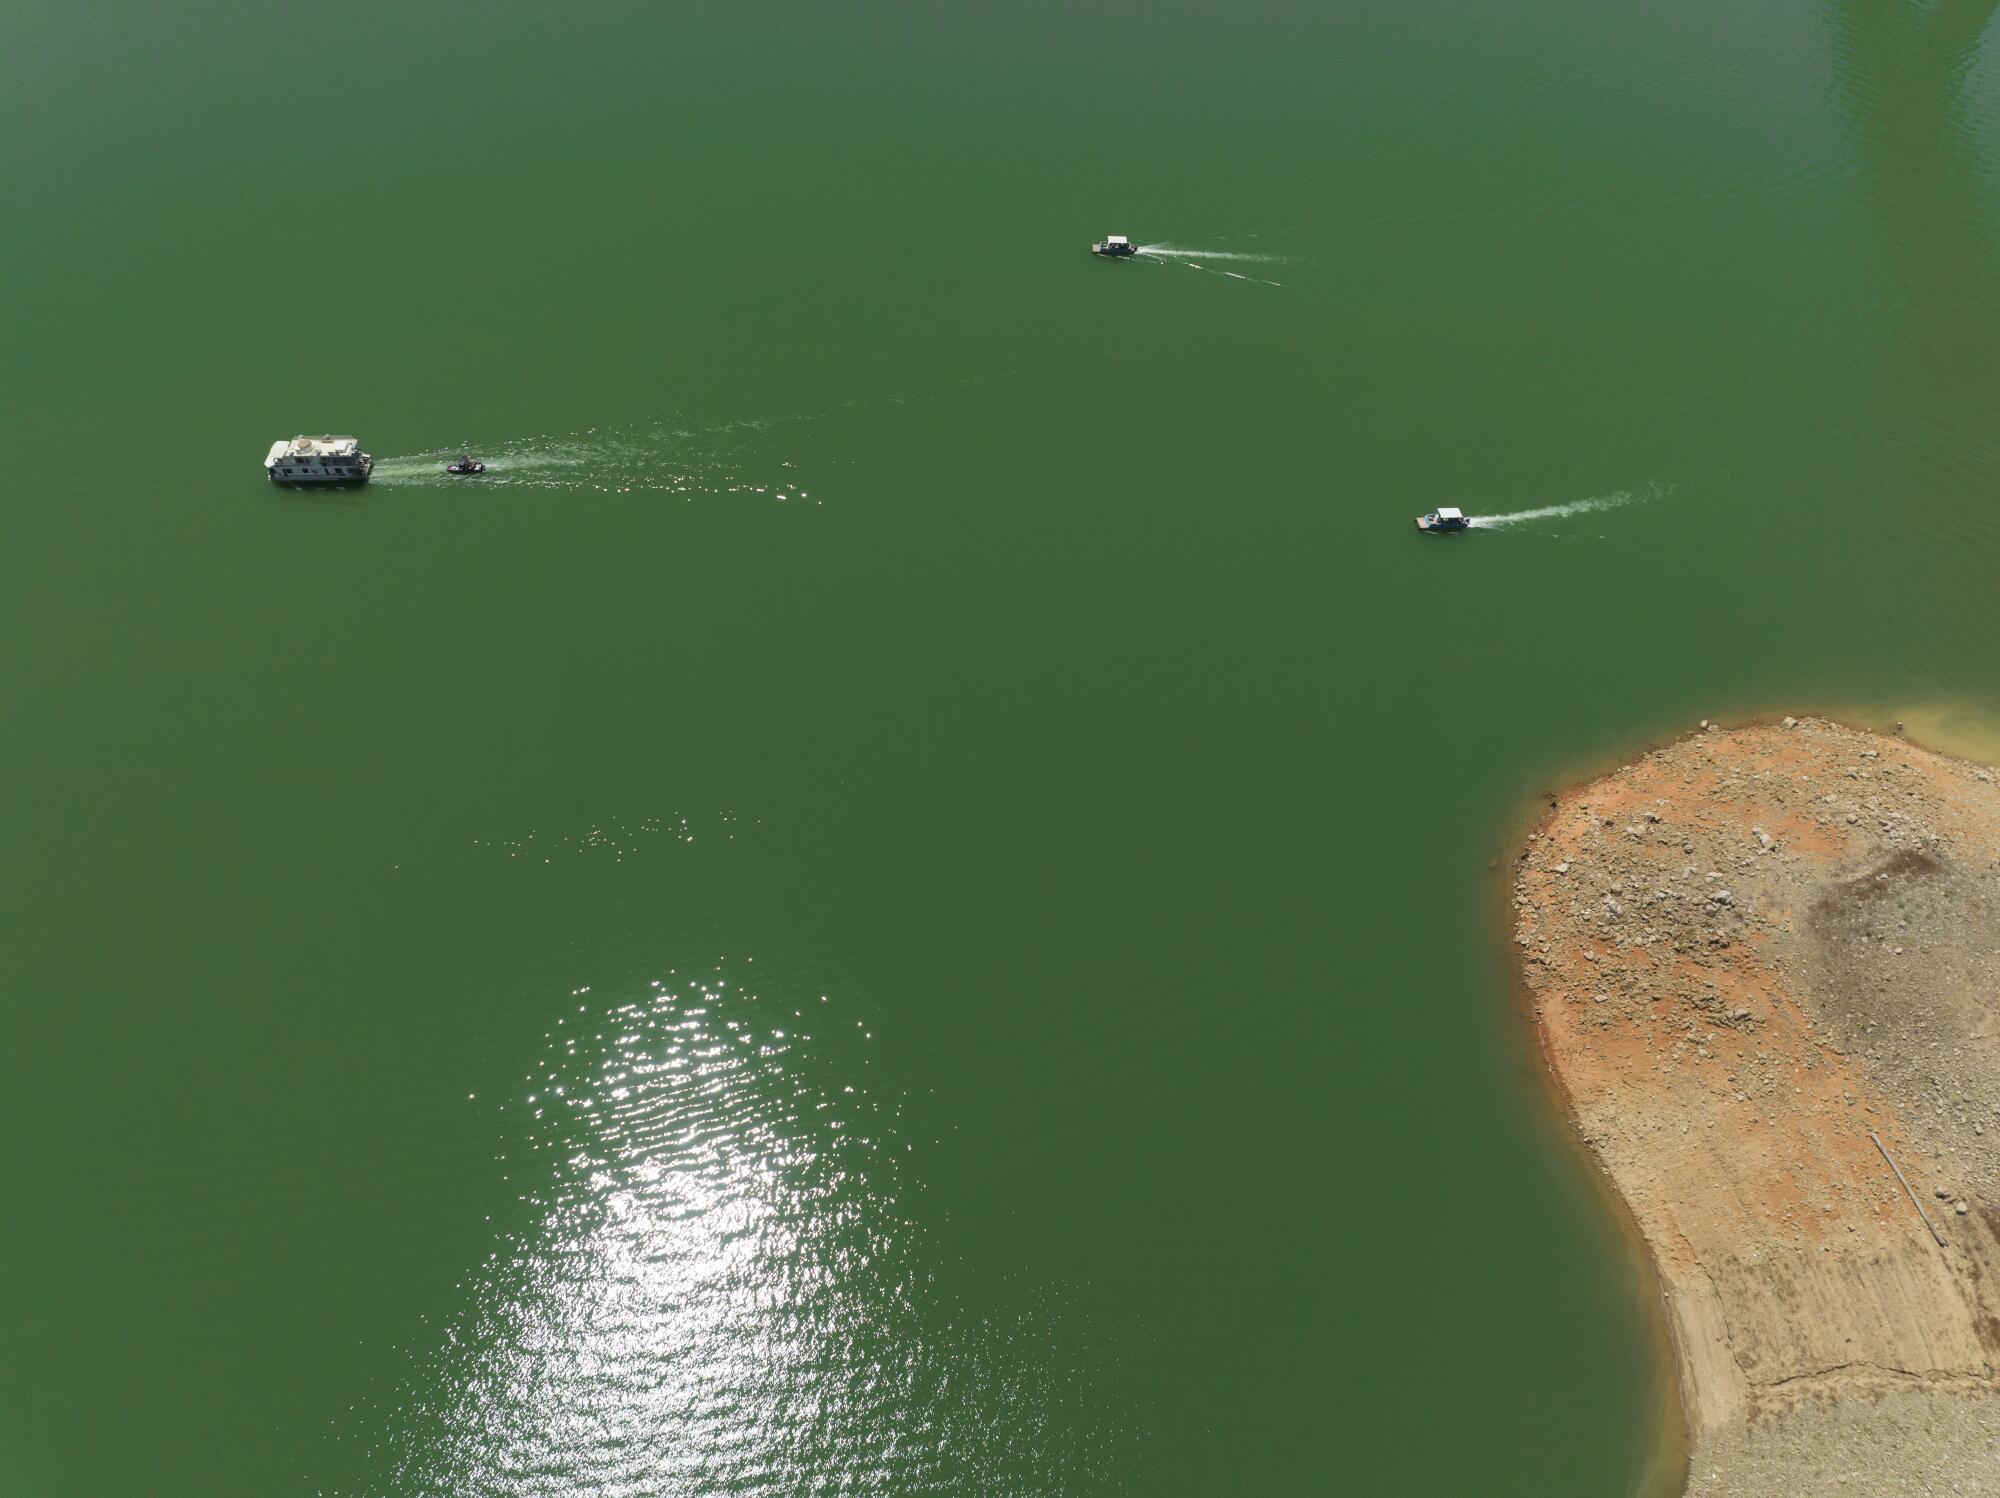 Boats glide through the water at Shasta Lake near exposed shoreline